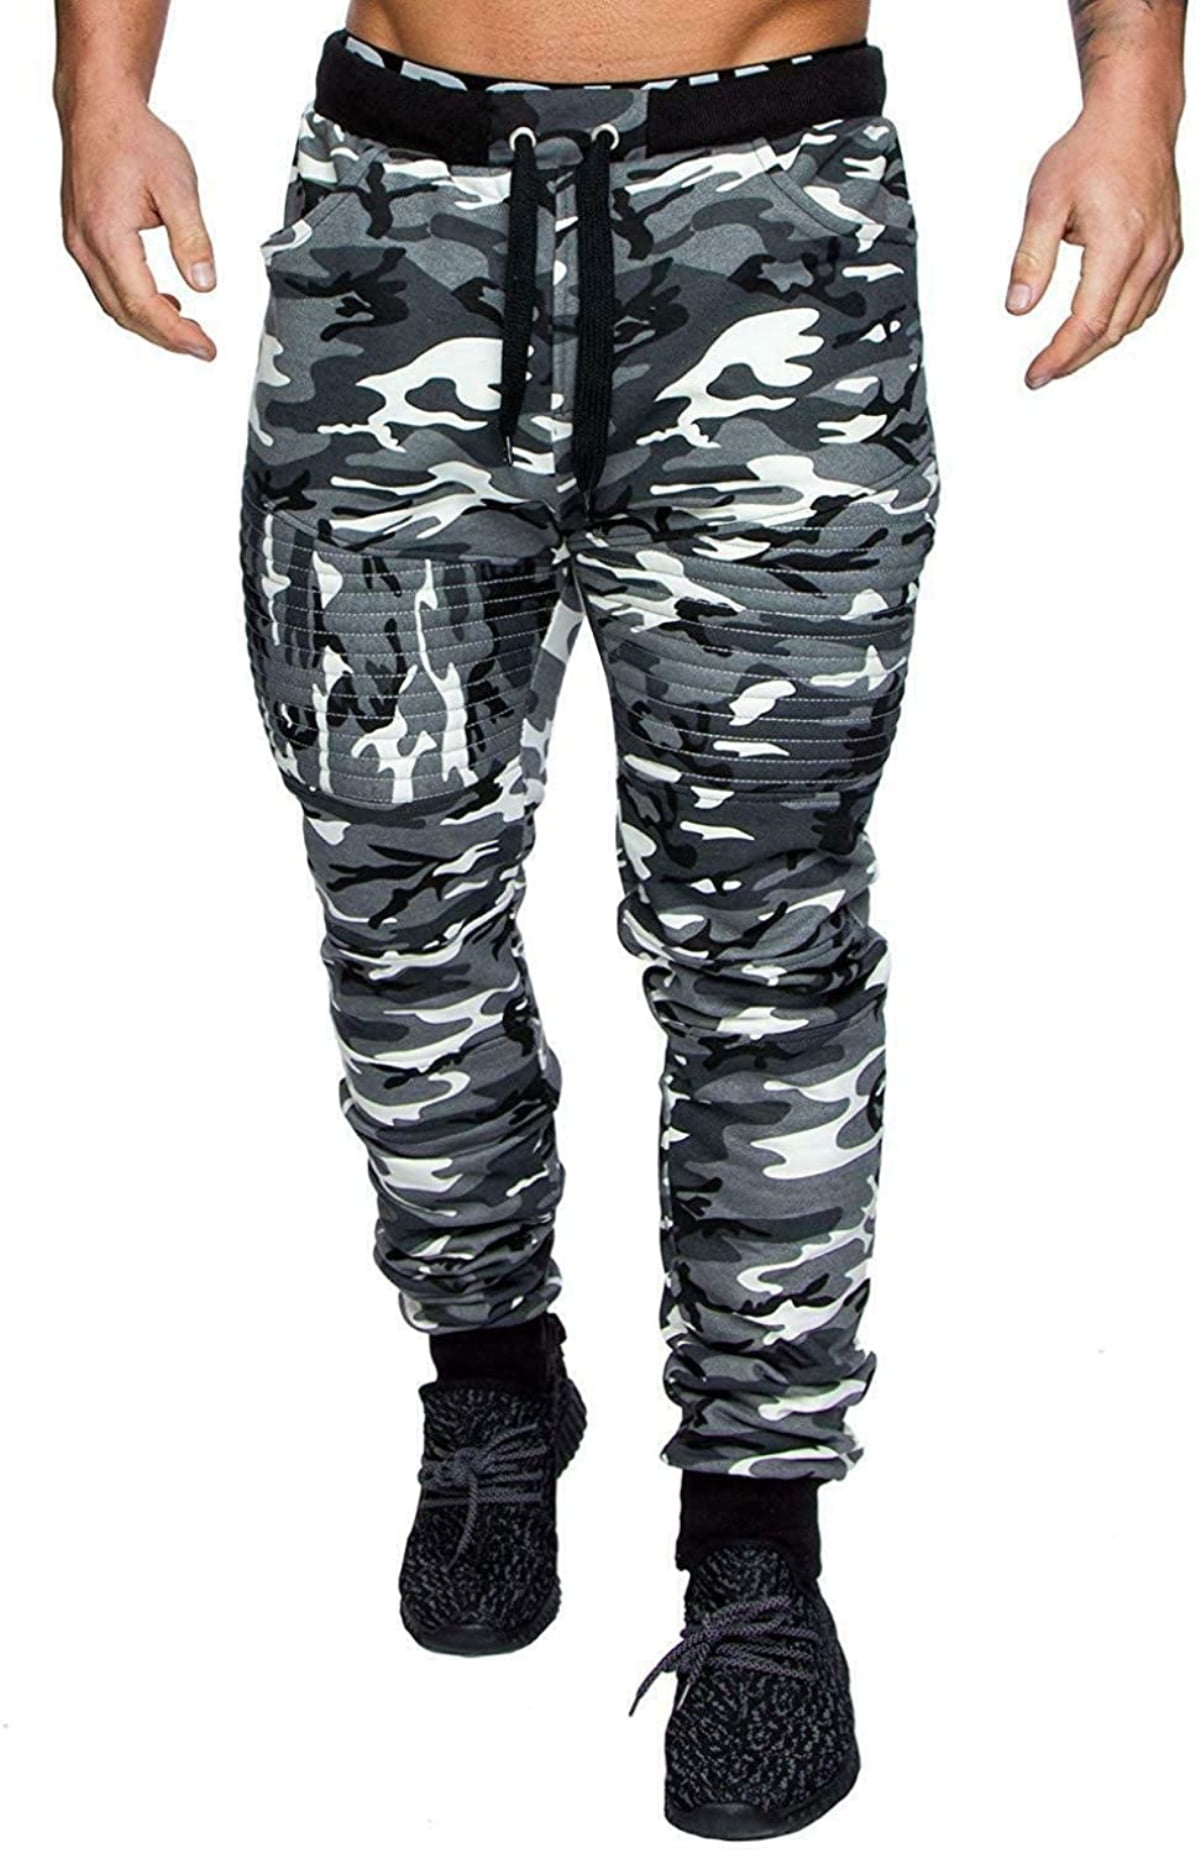 Girls Kids Camo Joggers Full Length Army Camouflage Tracksuit Bottom 3-16 Years 